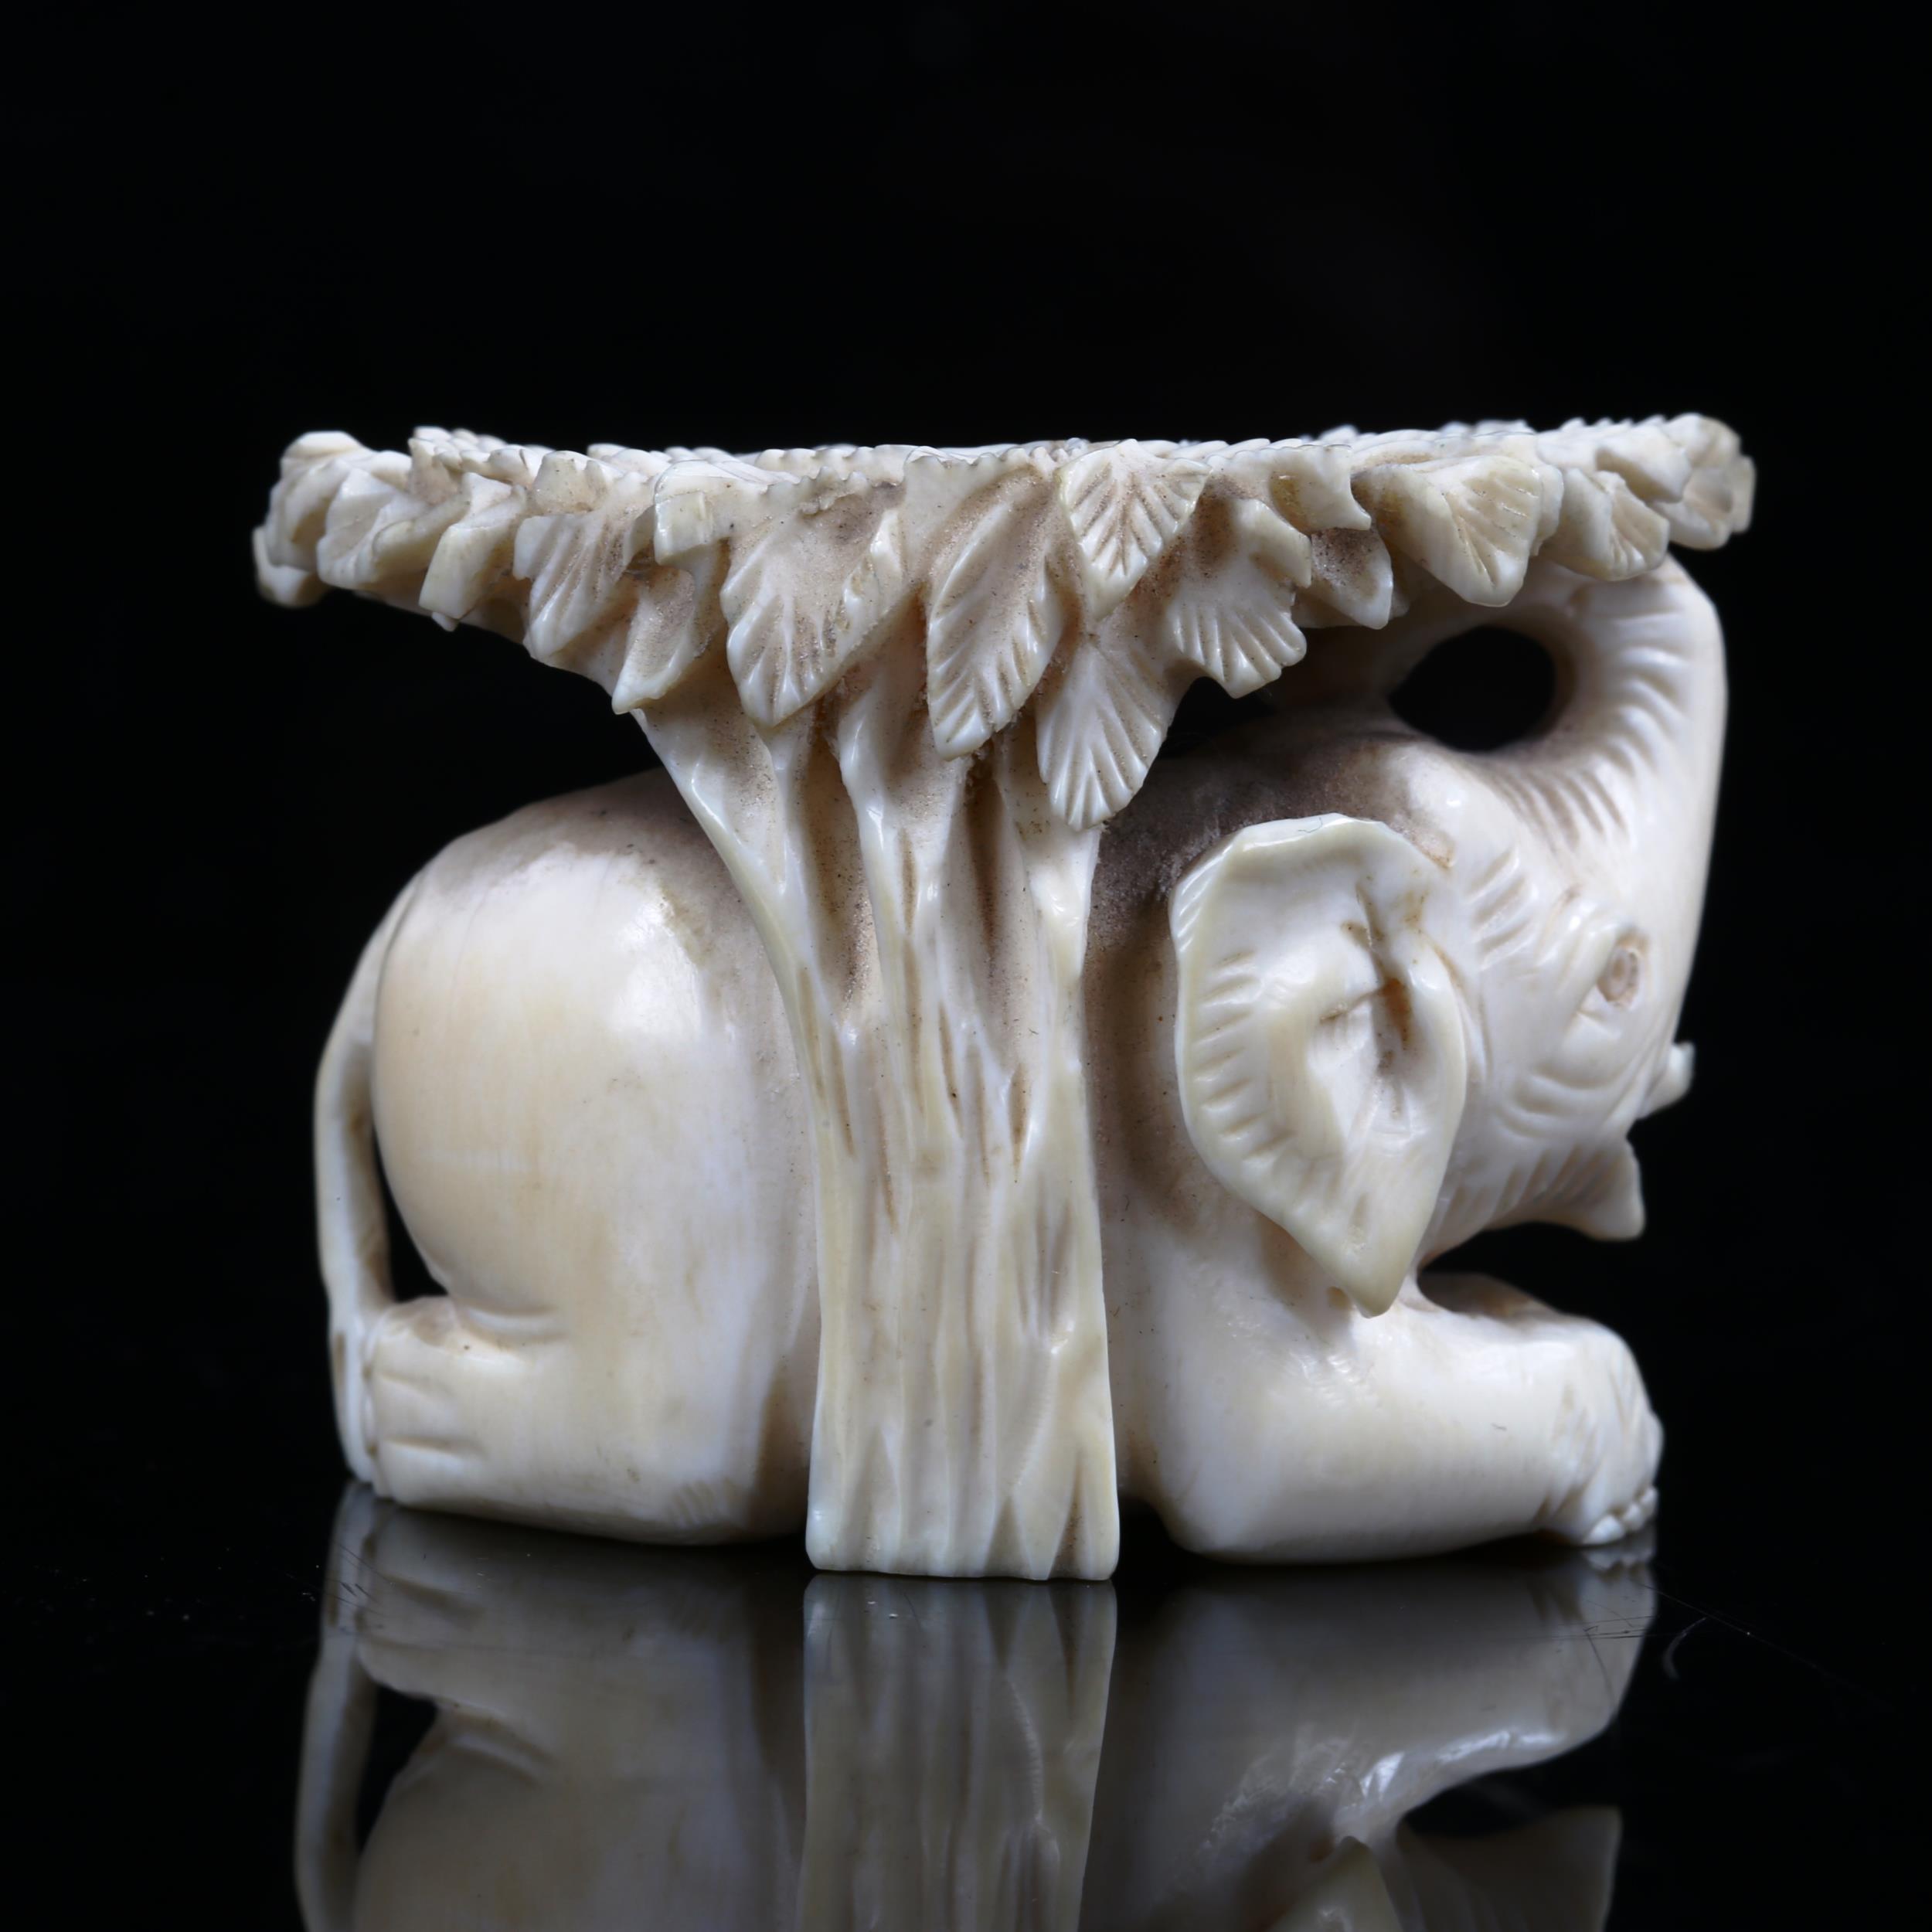 A 19th century ivory carving depicting an elephant sheltering under a tree, length 4.5cm - Image 4 of 5